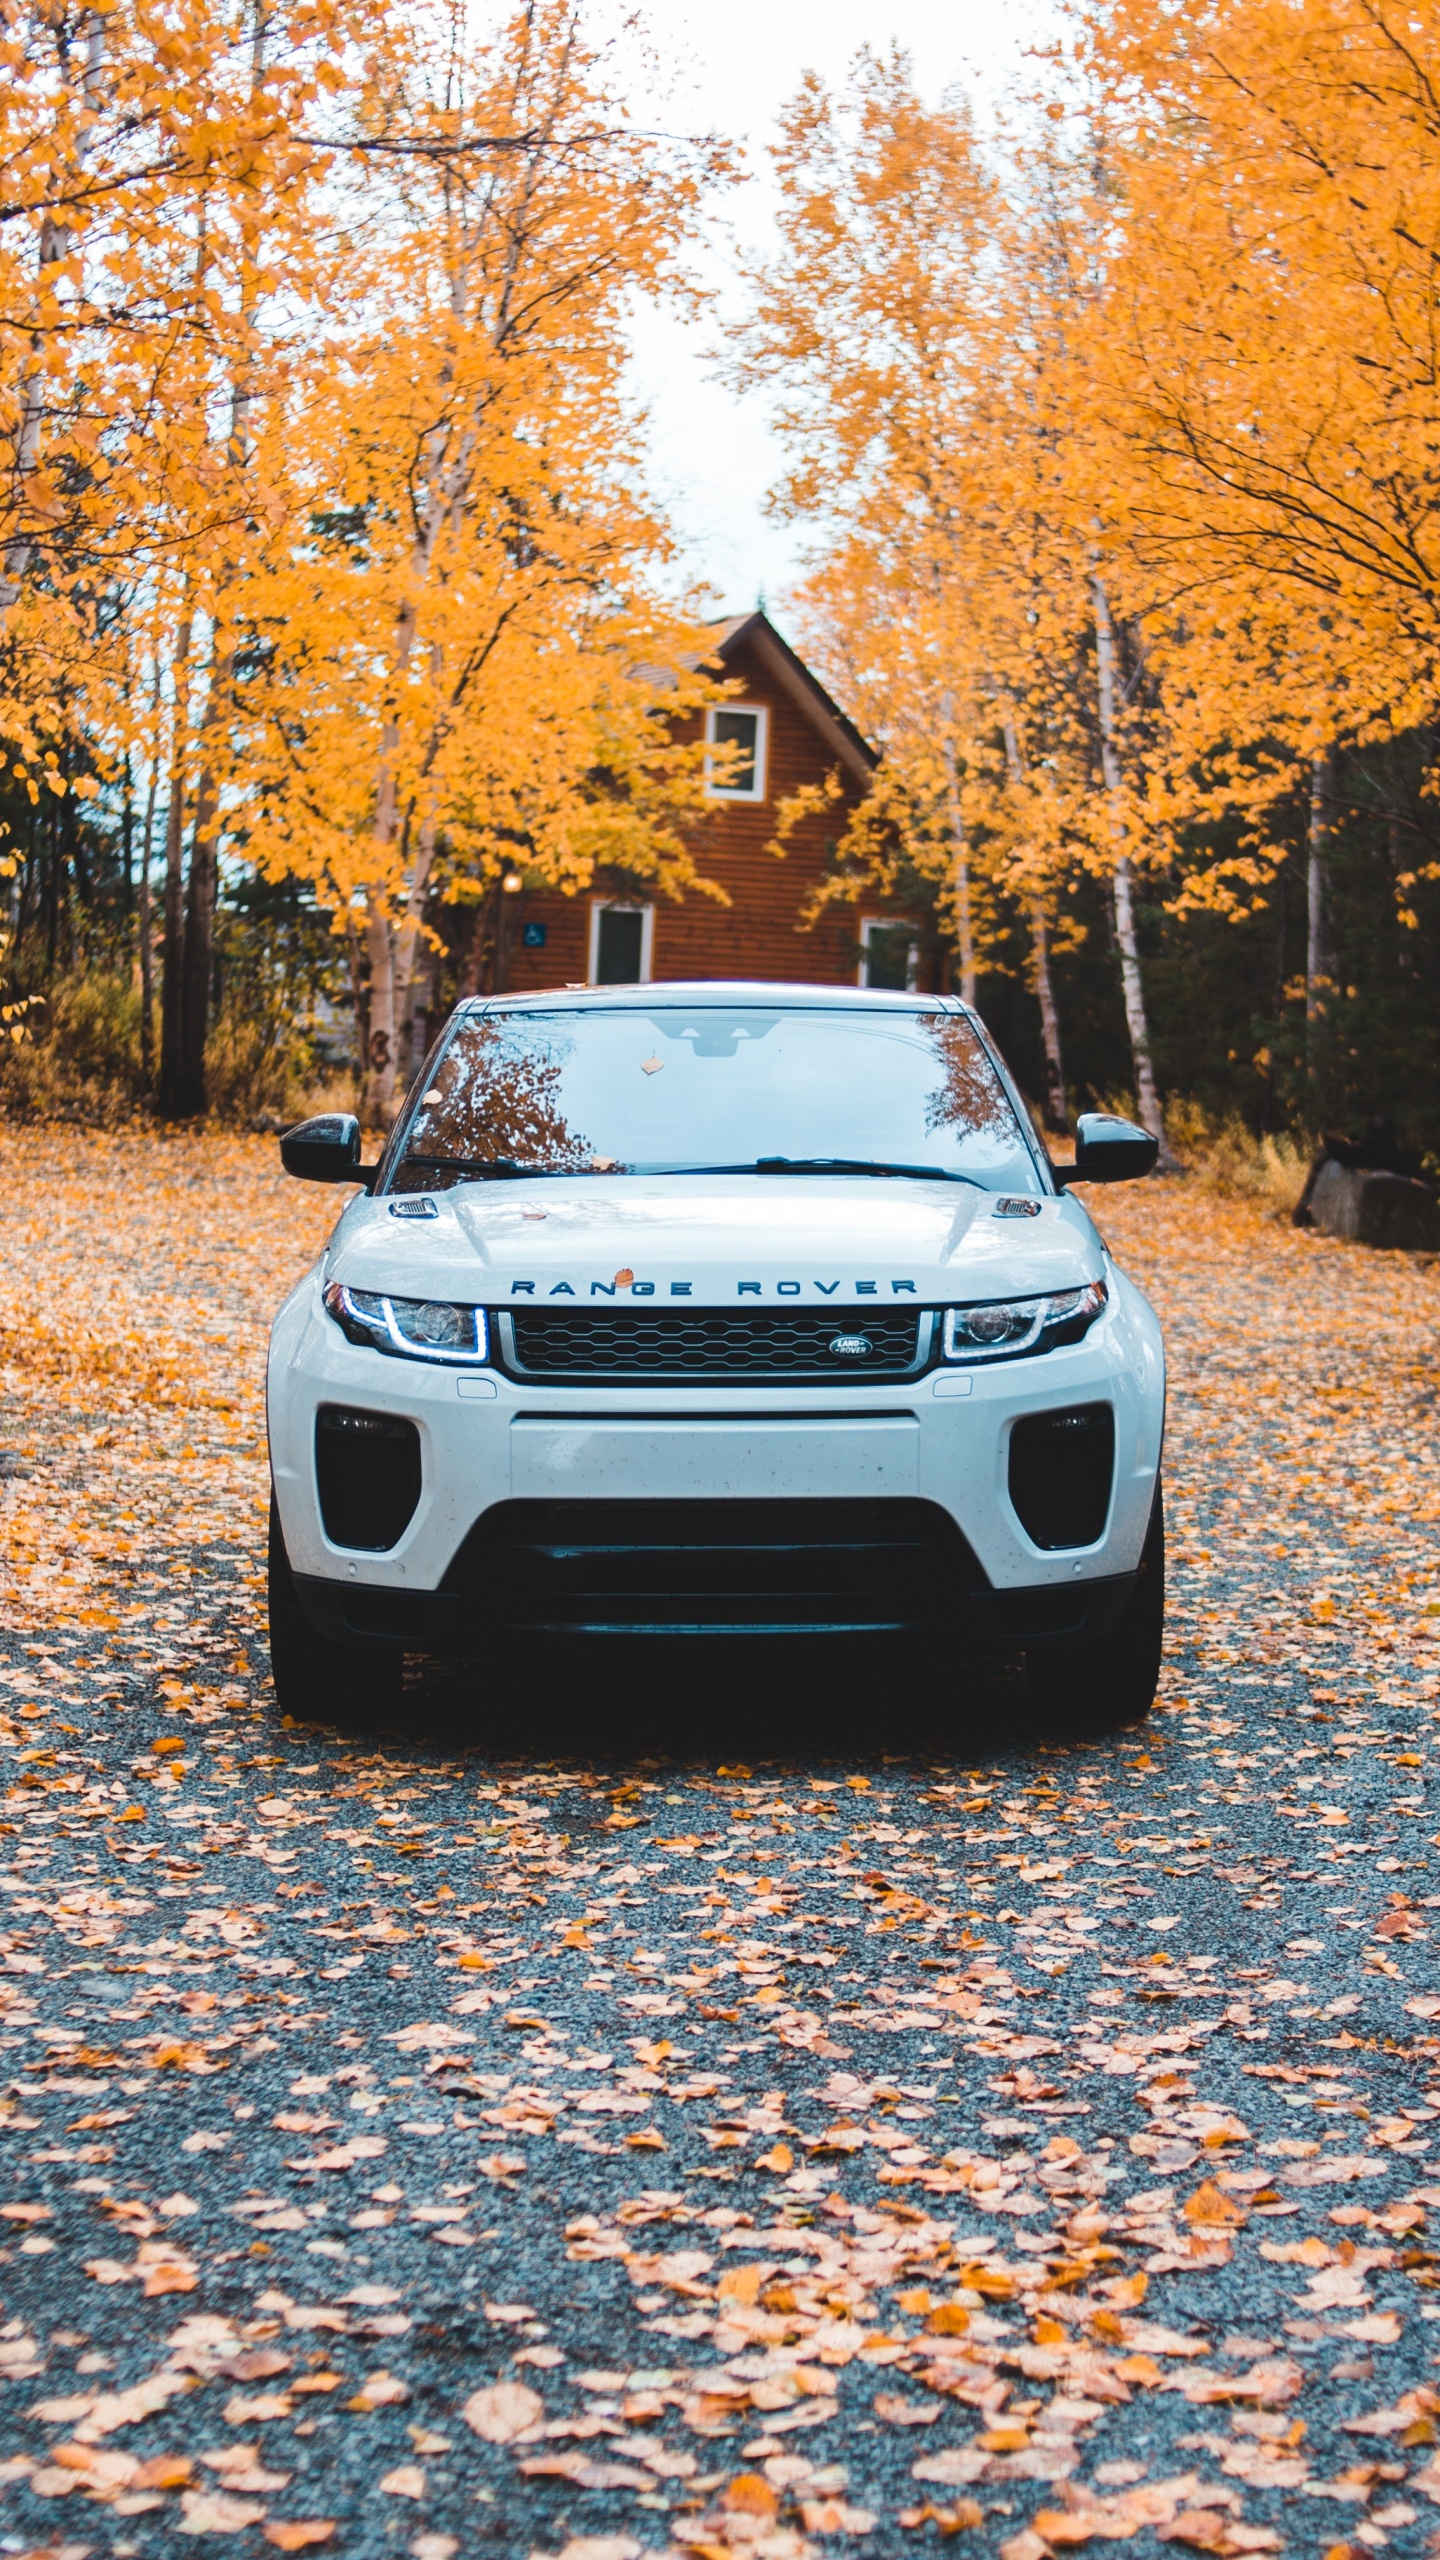 White Car Parked on Brown Dried Leaves on Ground During Daytime. Wallpaper in 1440x2560 Resolution